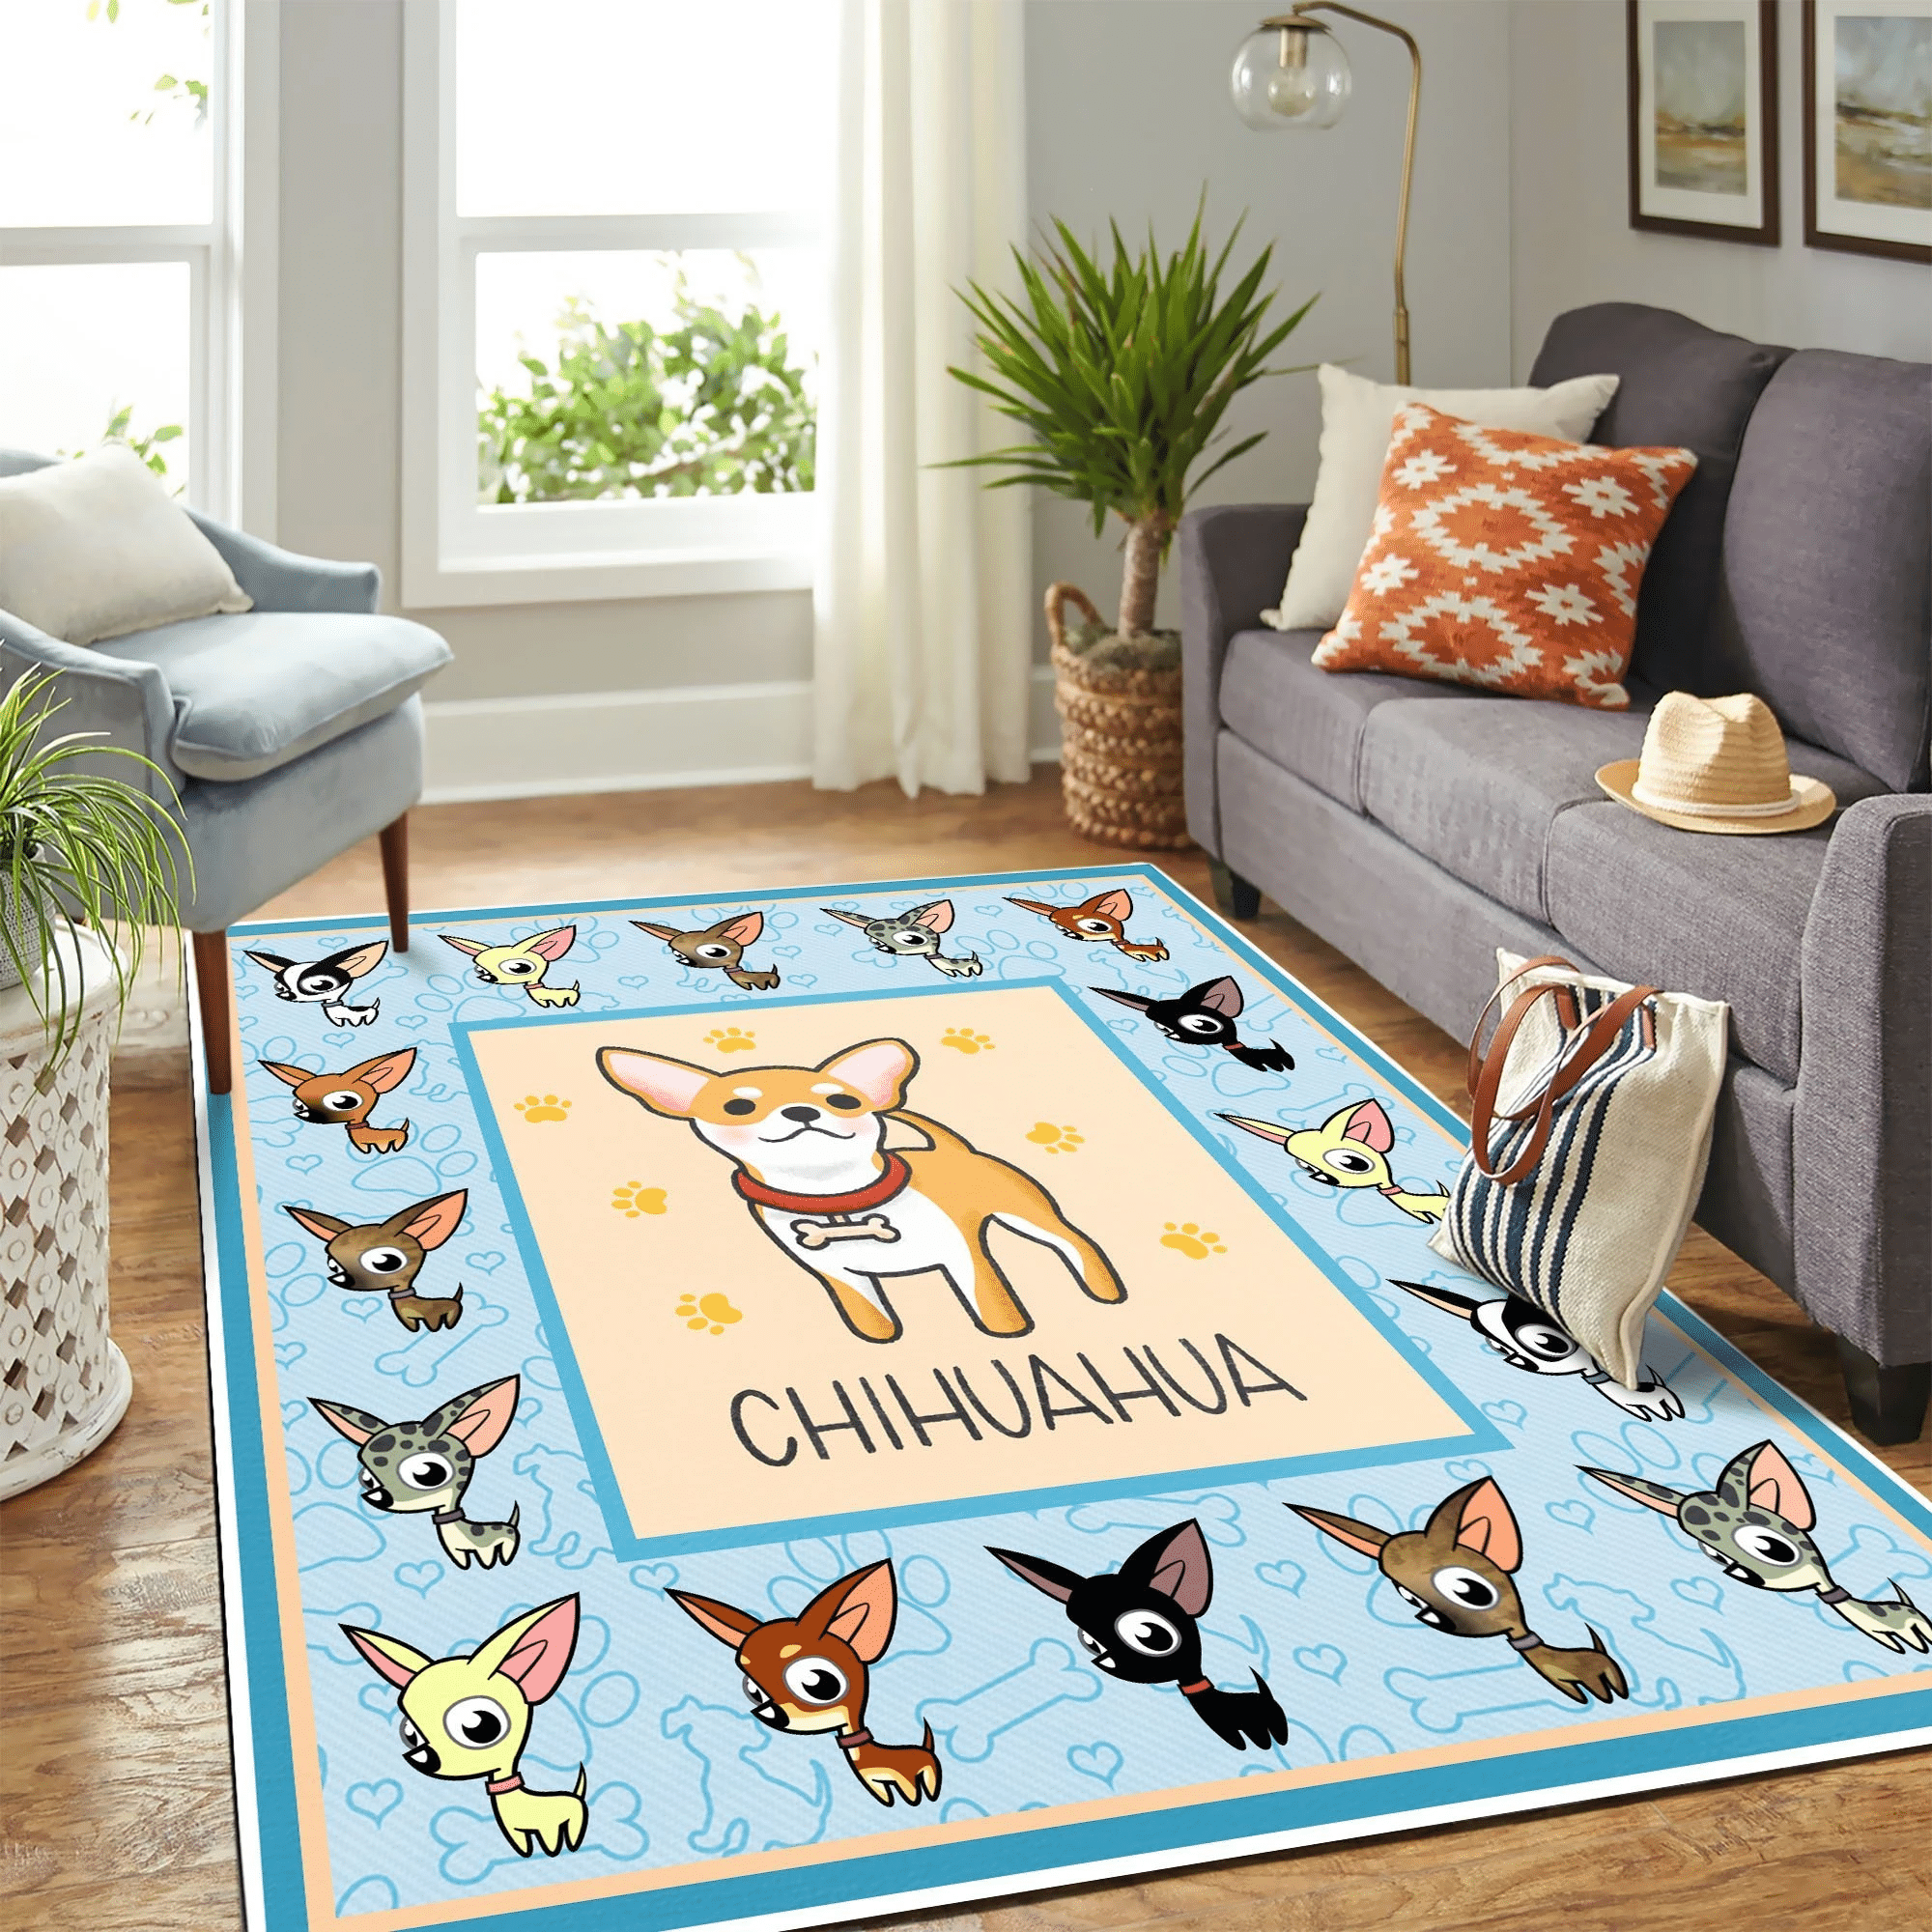 Cute Chihuahua Mk Carpet Area Rug Chrismas Gift - Indoor Outdoor Rugs